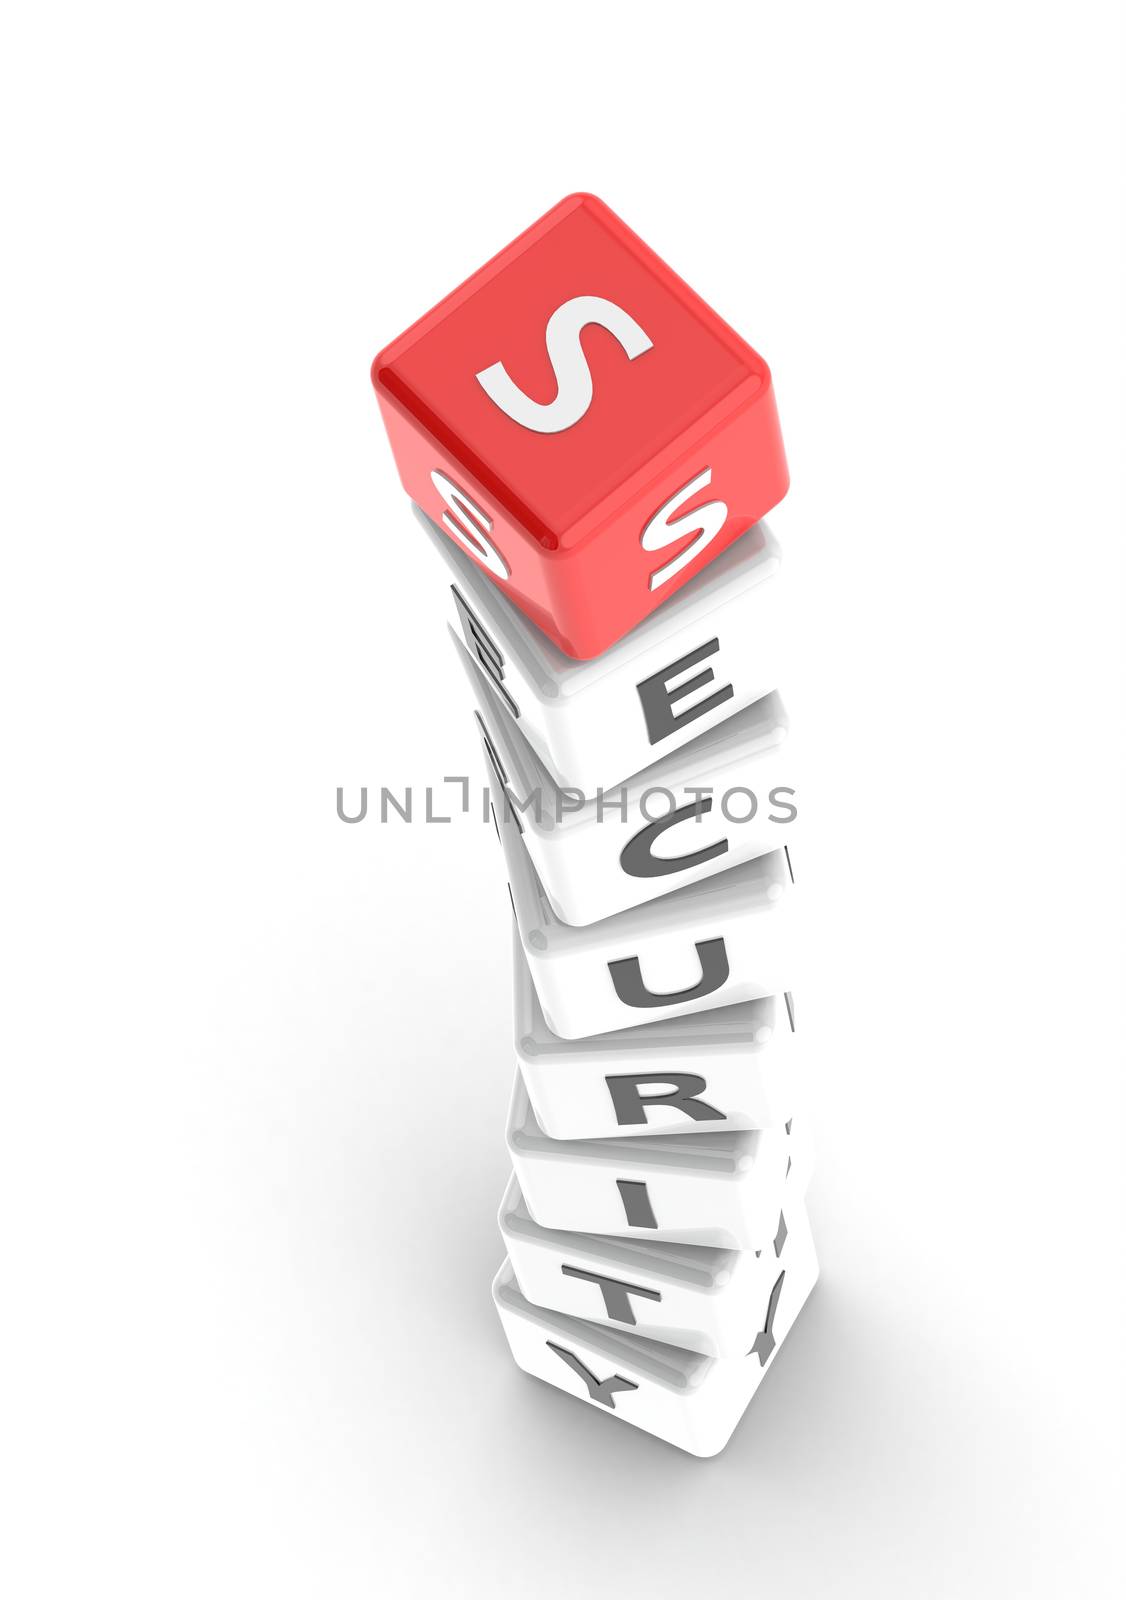 Security puzzle word image with hi-res rendered artwork that could be used for any graphic design.